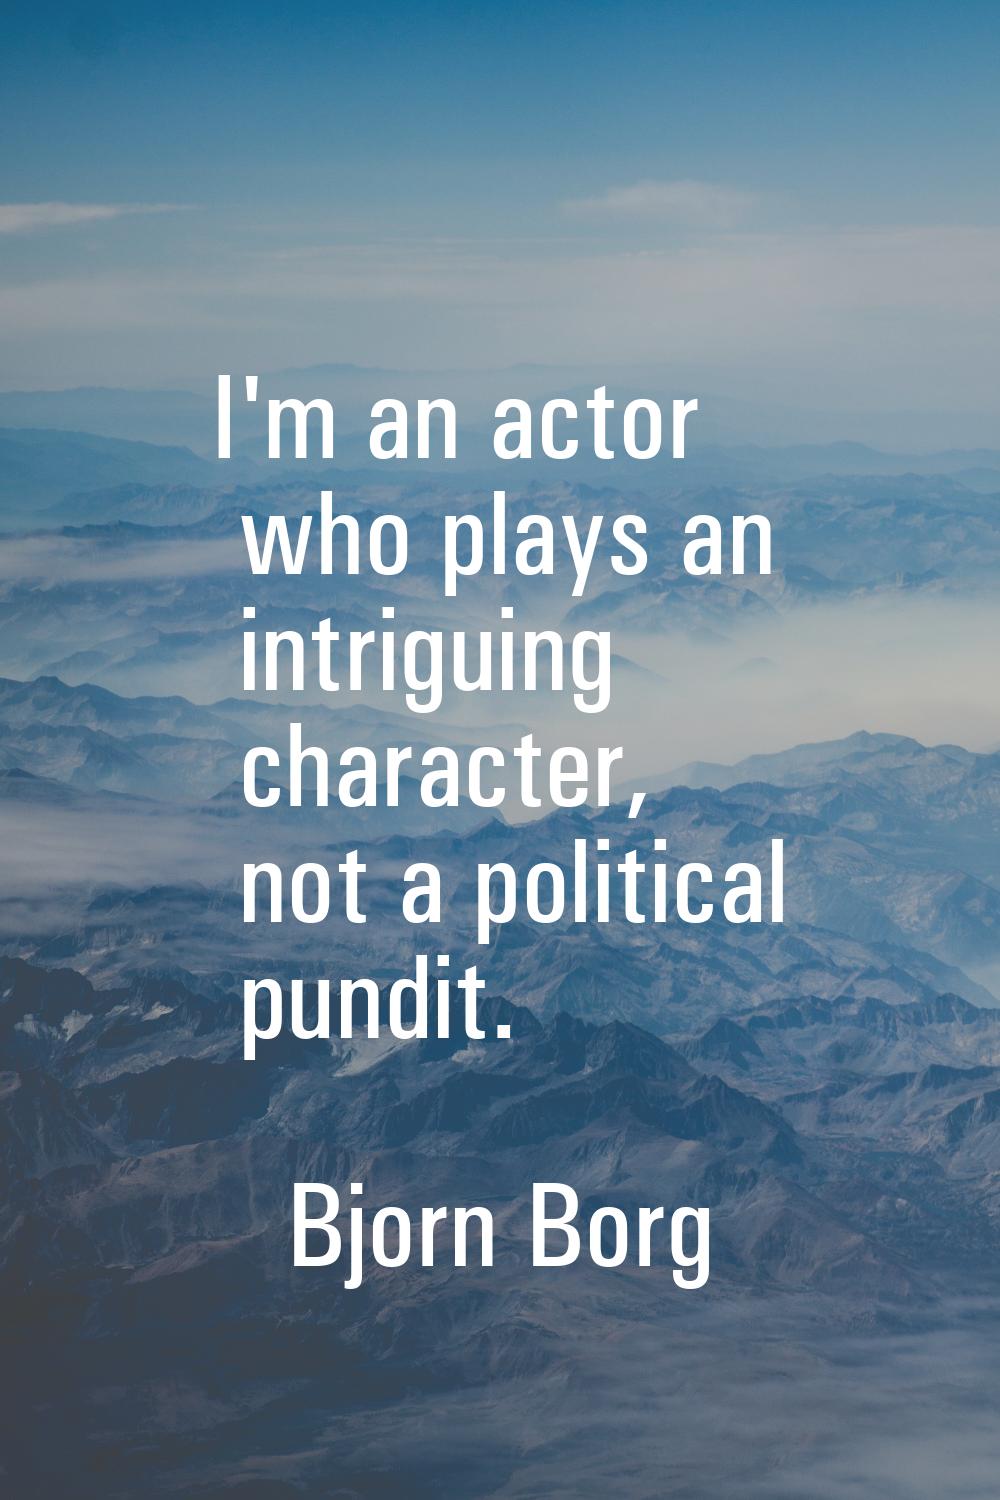 I'm an actor who plays an intriguing character, not a political pundit.